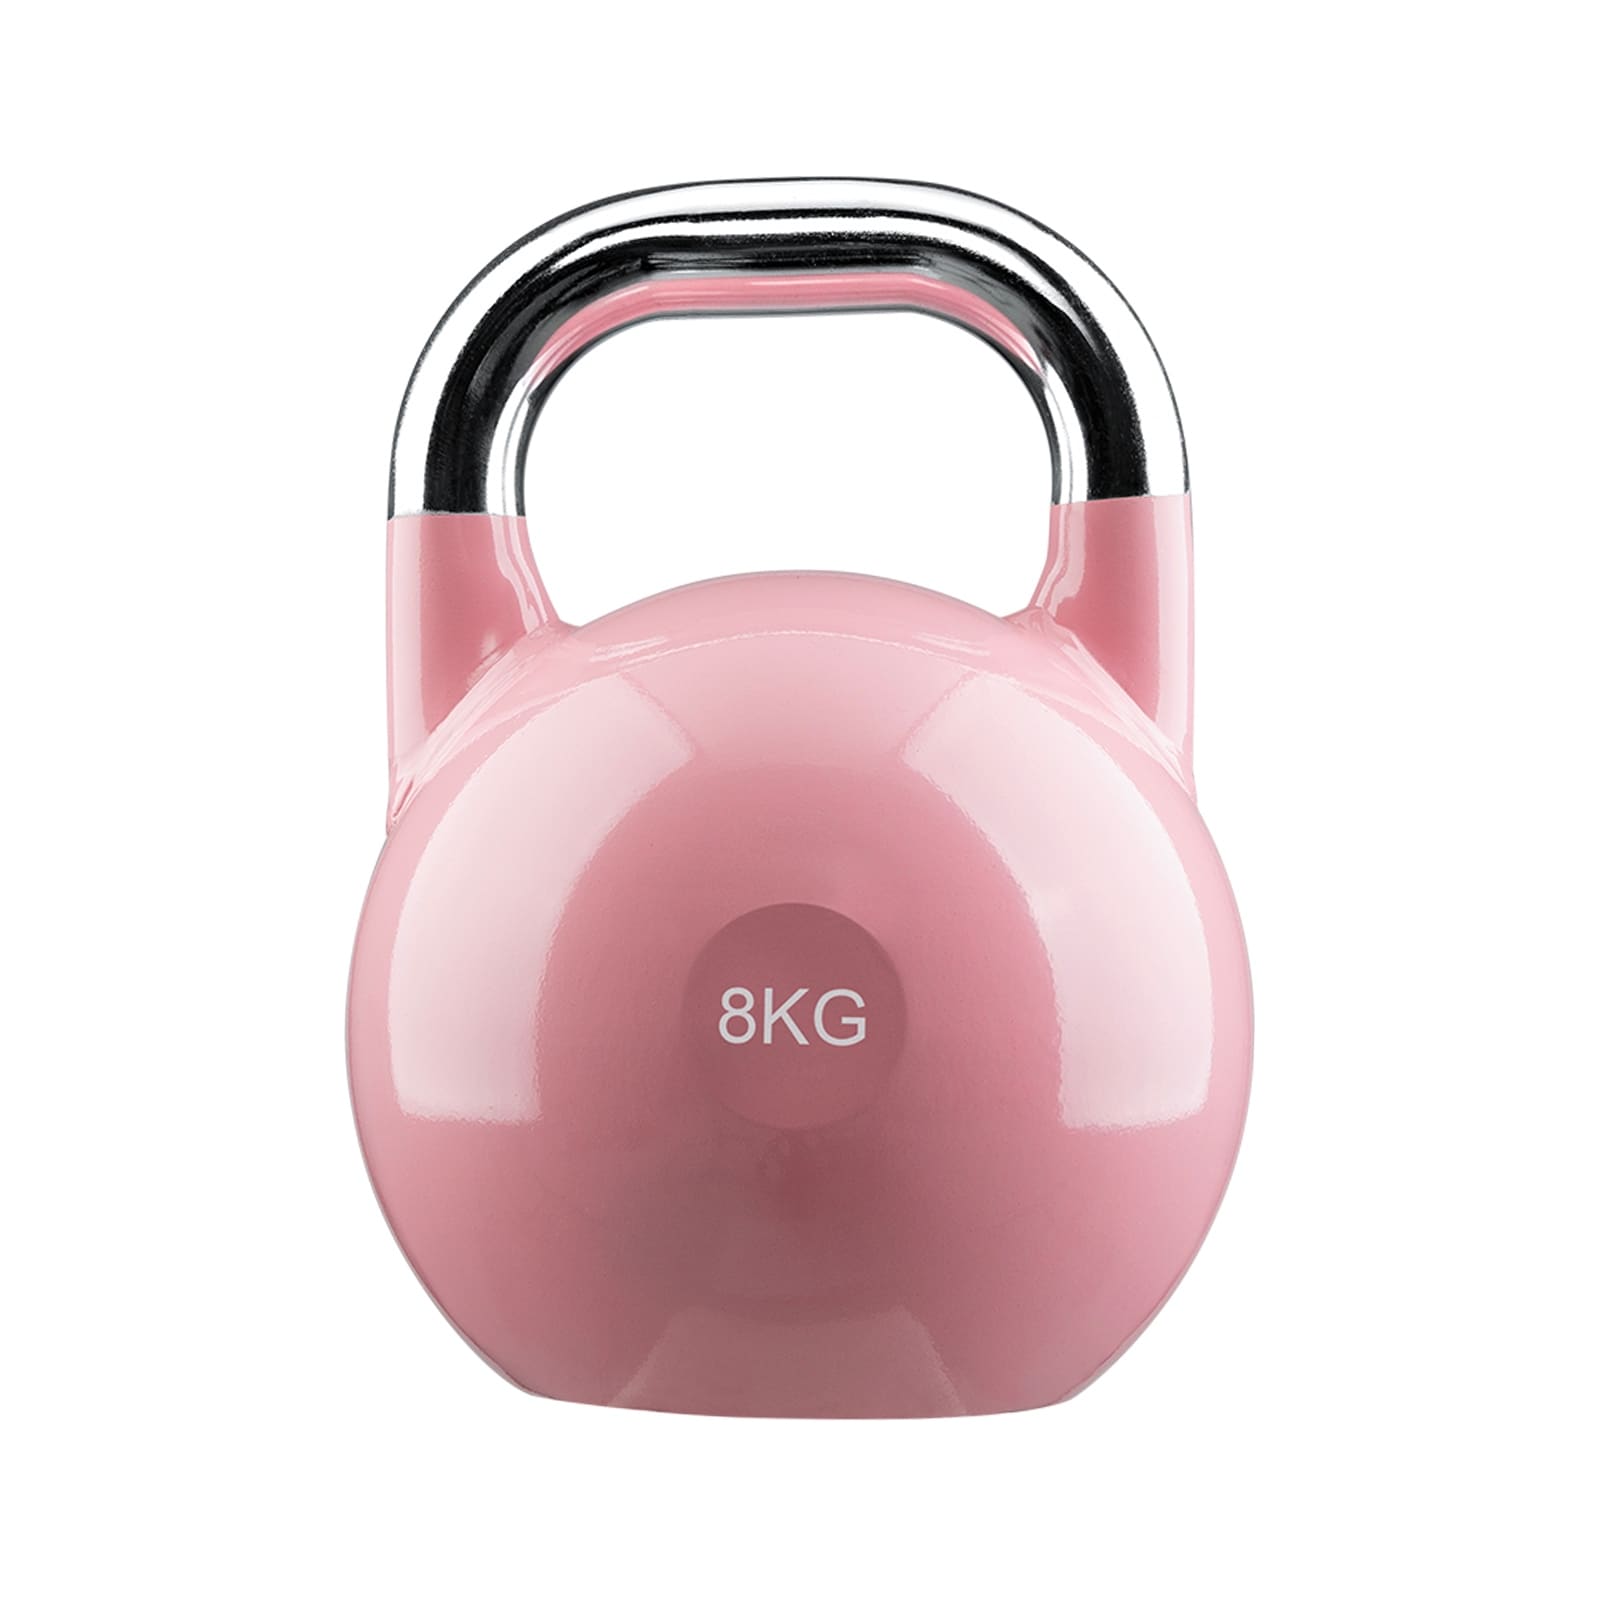 VENTRAY HOME Steel Kettlebell, Competition Kettle Bell for Training, Exercise Fitness Weight Set, 8kg/17.6lbs, Pink - 8 - - 37497506